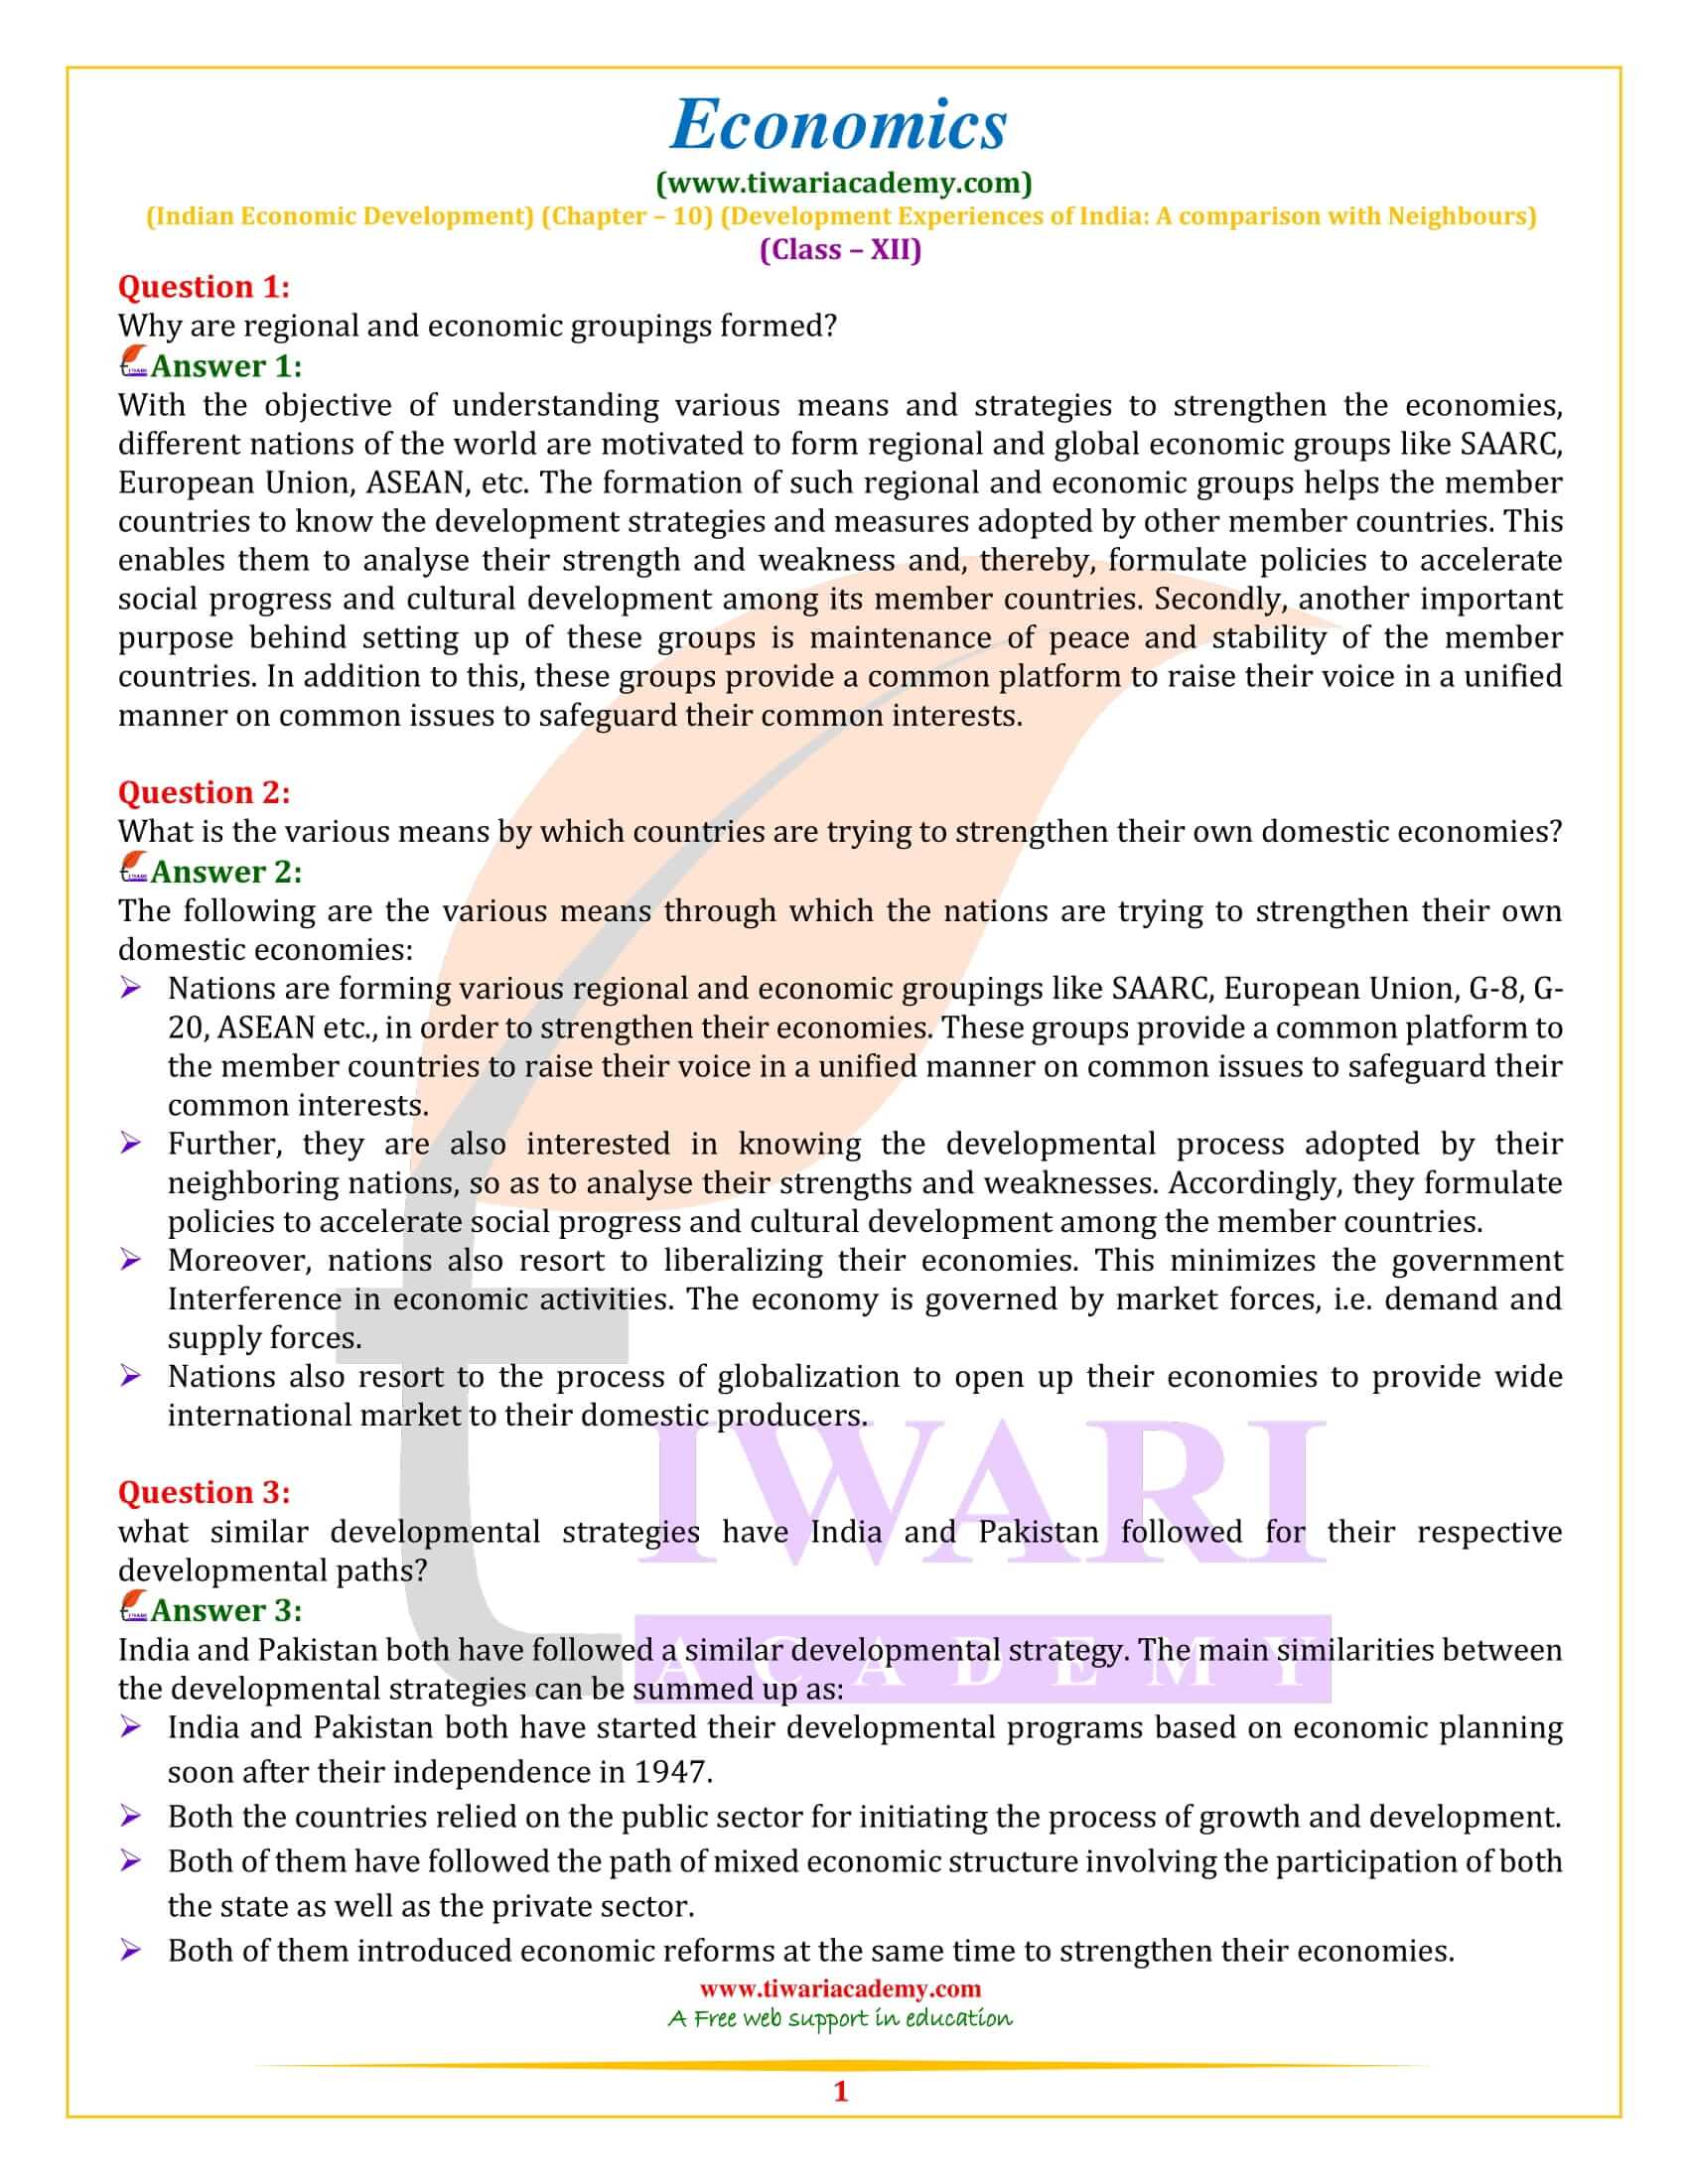 Class 12 Indian Economic Development Chapter 10 Comparative Development Experiences of India and its Neighbours